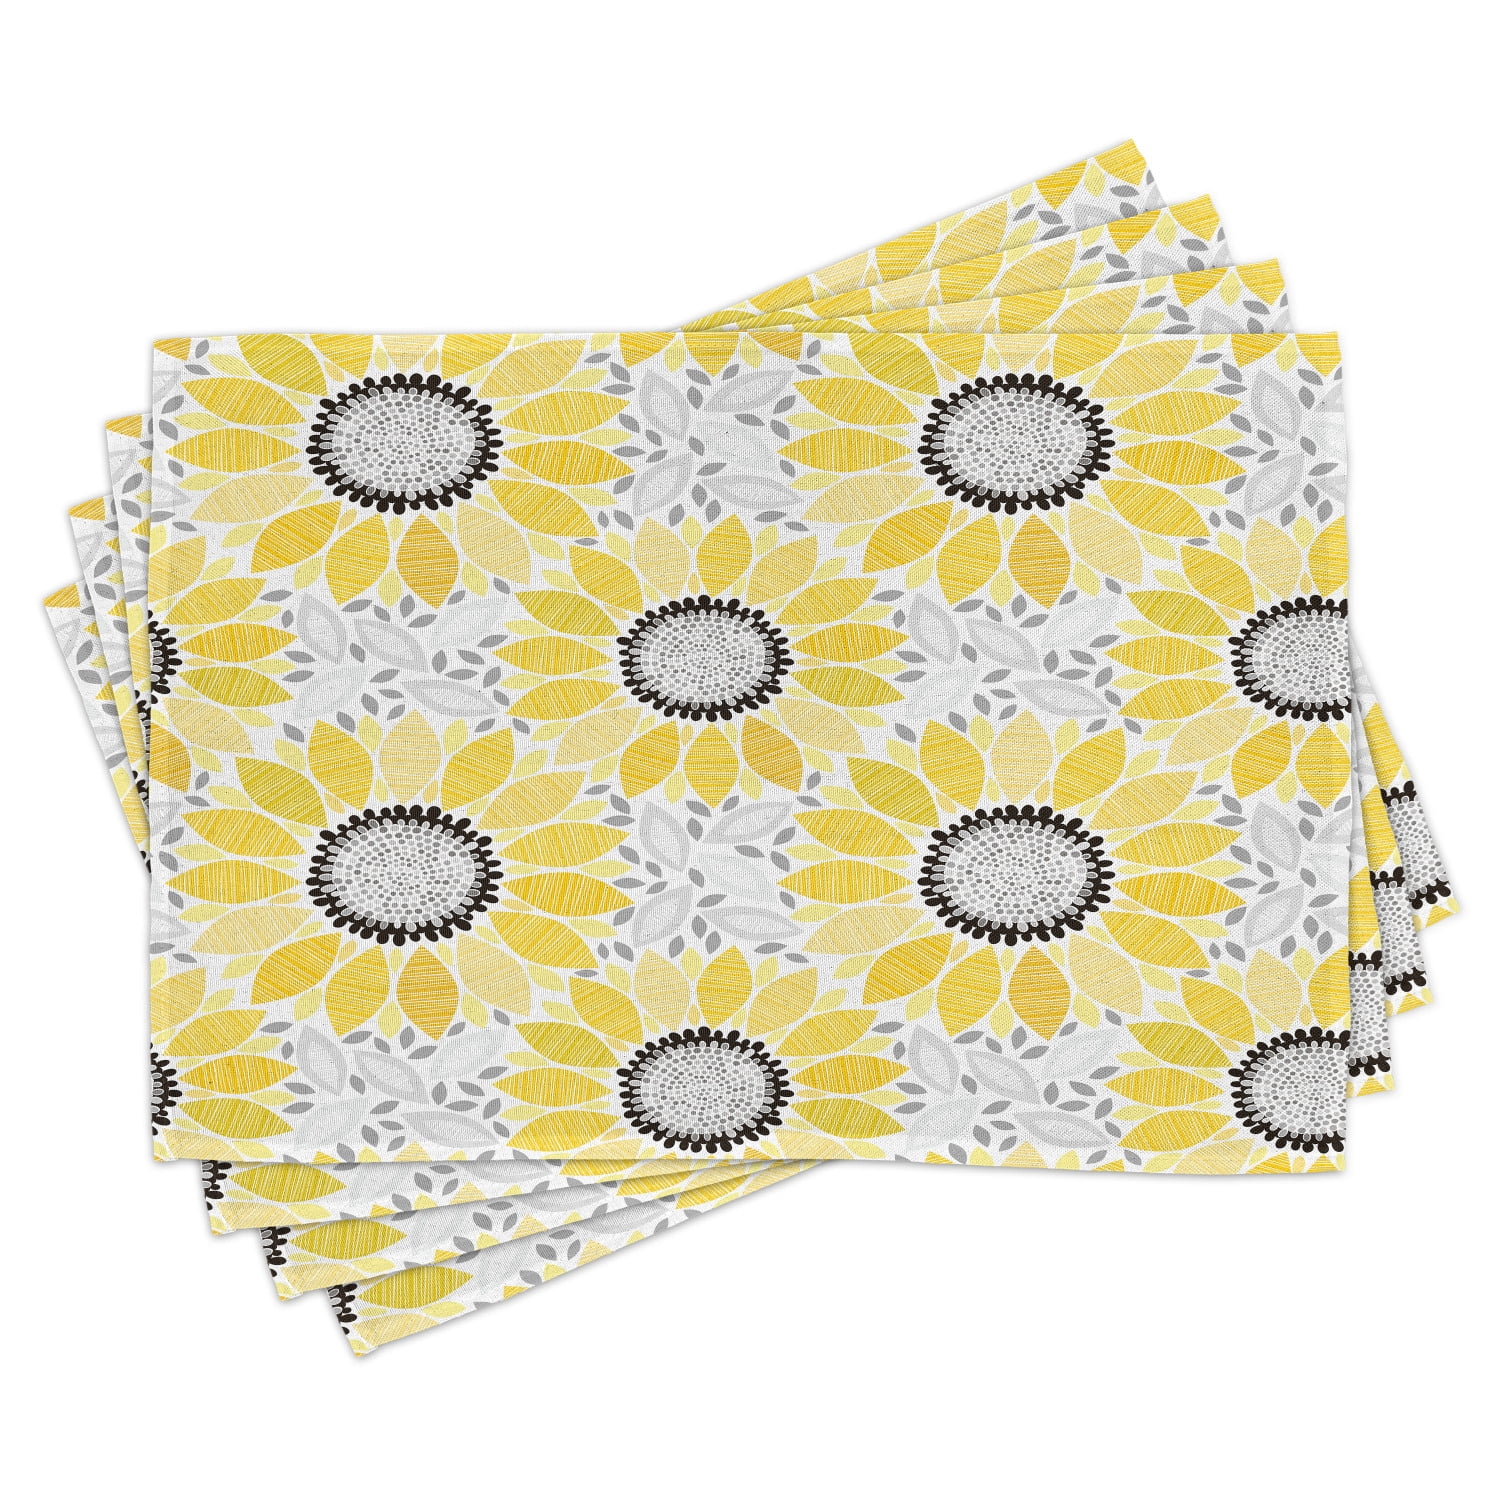 Yellow Flower Placemats Set of 6 Hand Drawn Watercolor Sunflowers Non Slip Placemat 12x18 inch Floral Table Mats for Kitchen Dinning Room 